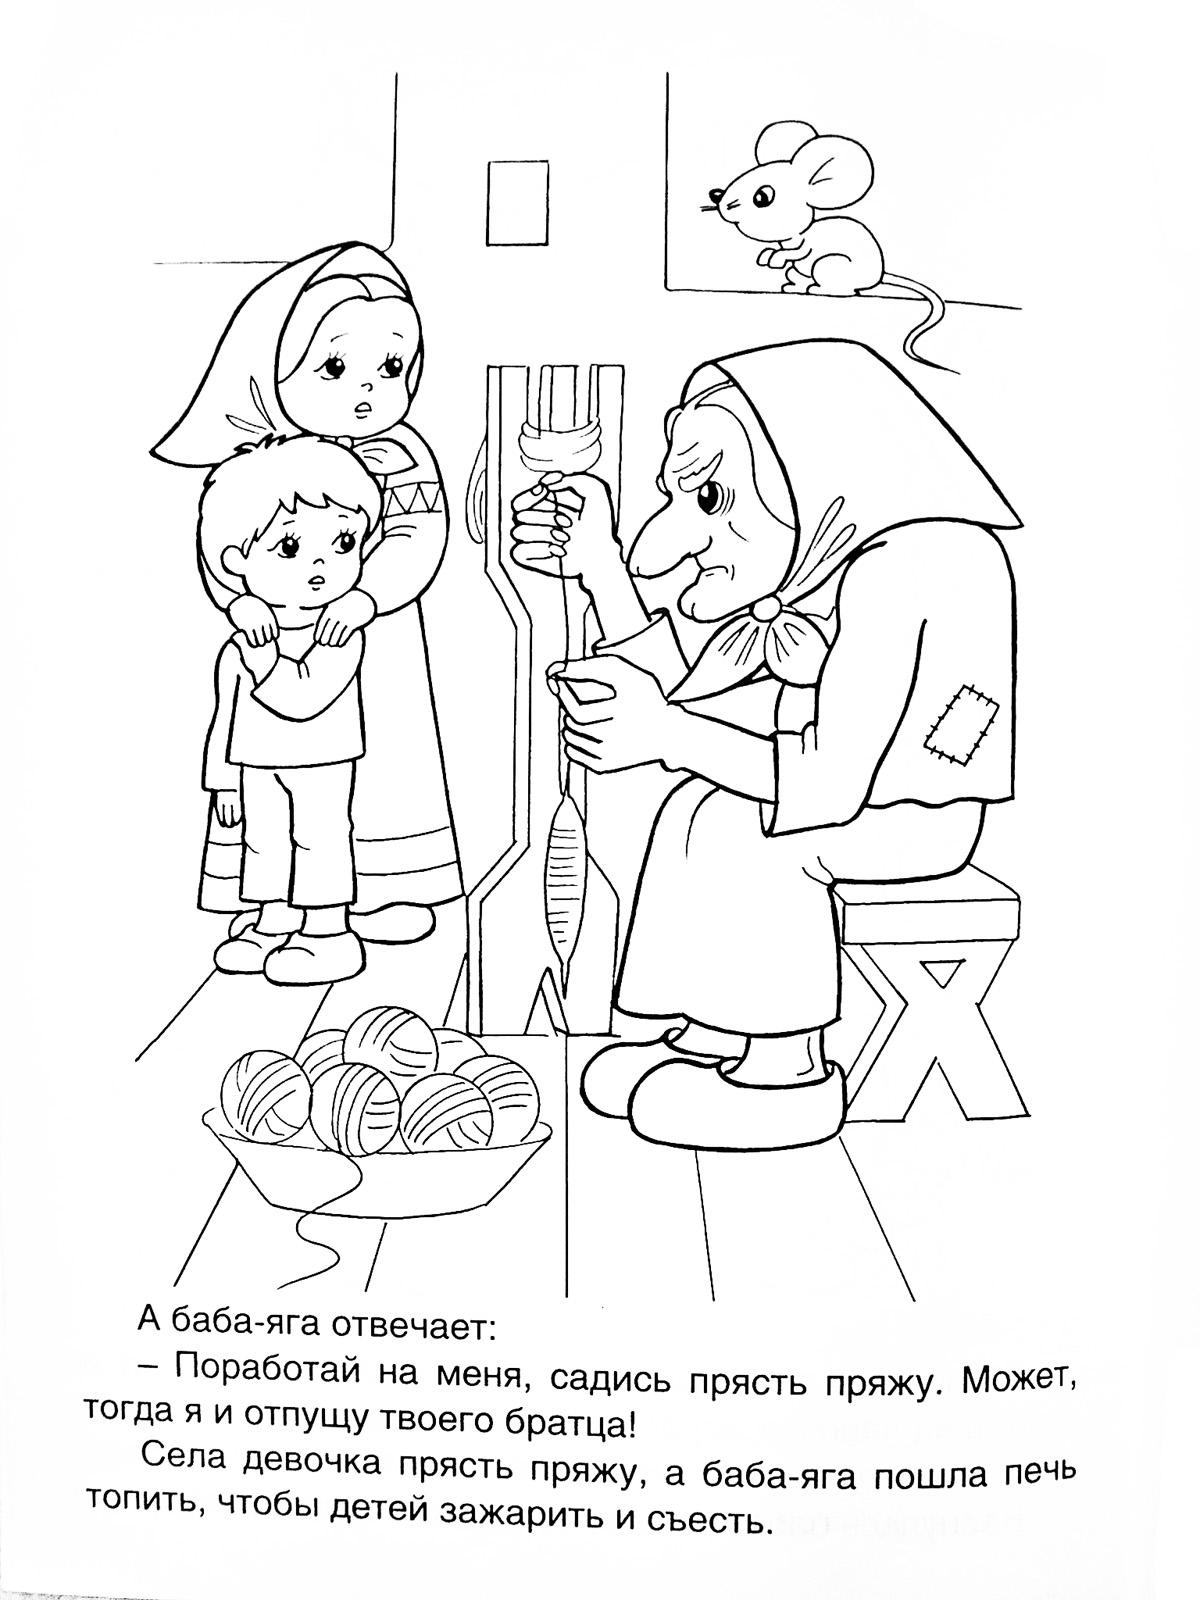 Coloring baba brother and sister, and Baba Yaga, geese Tale coloring pages